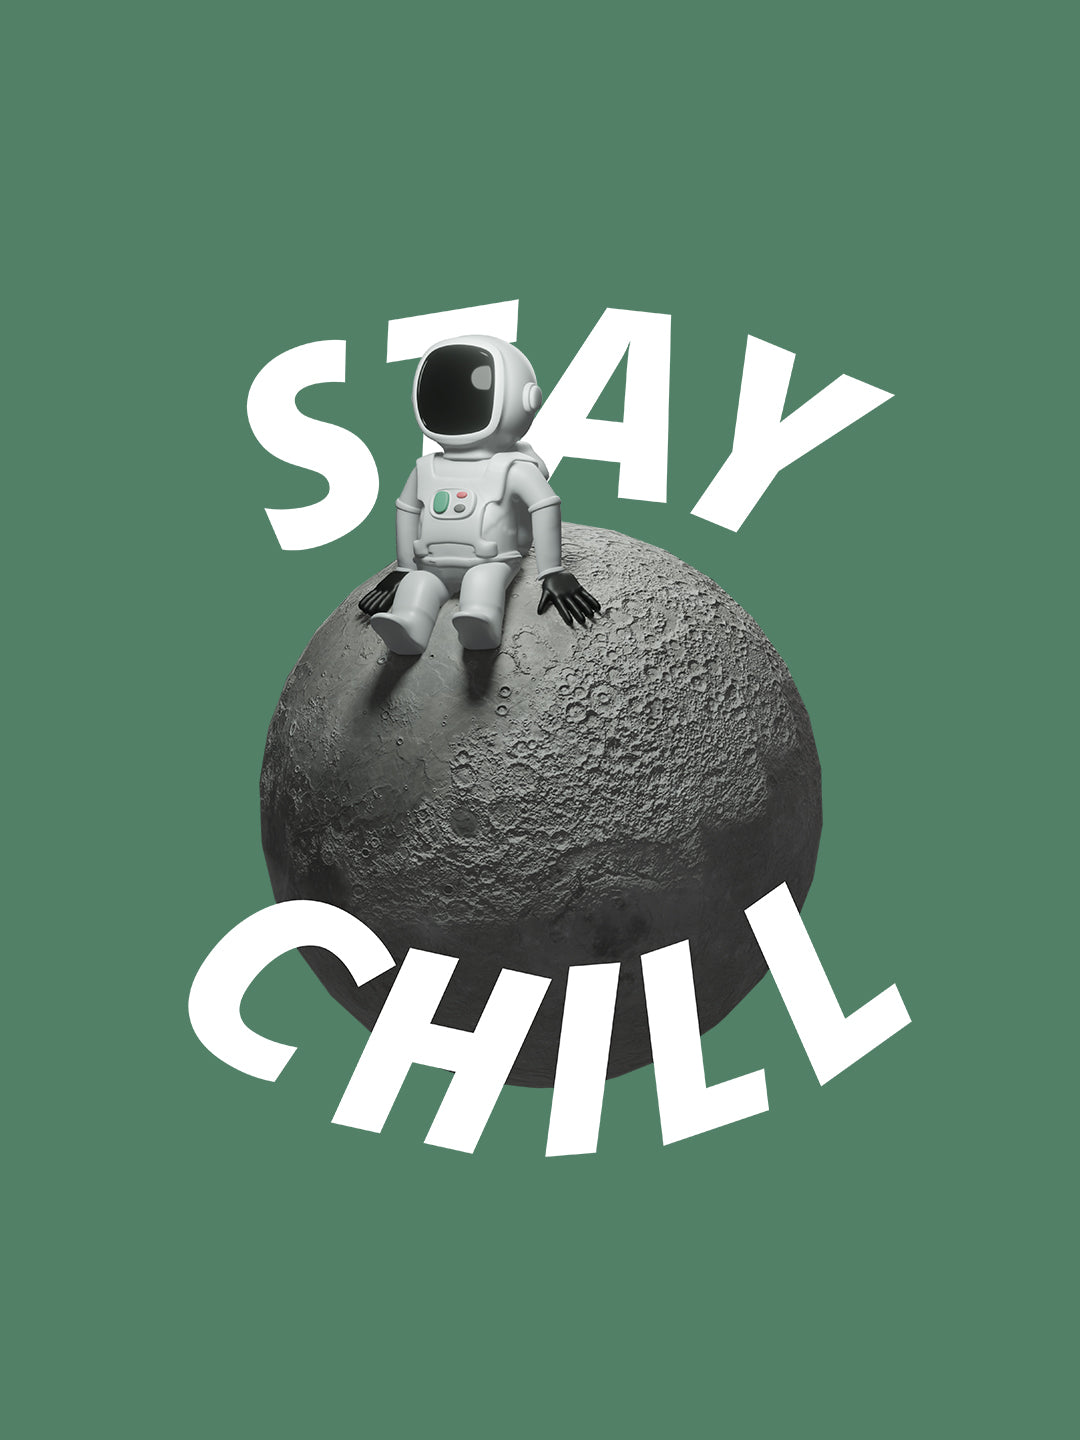 Stay Chill